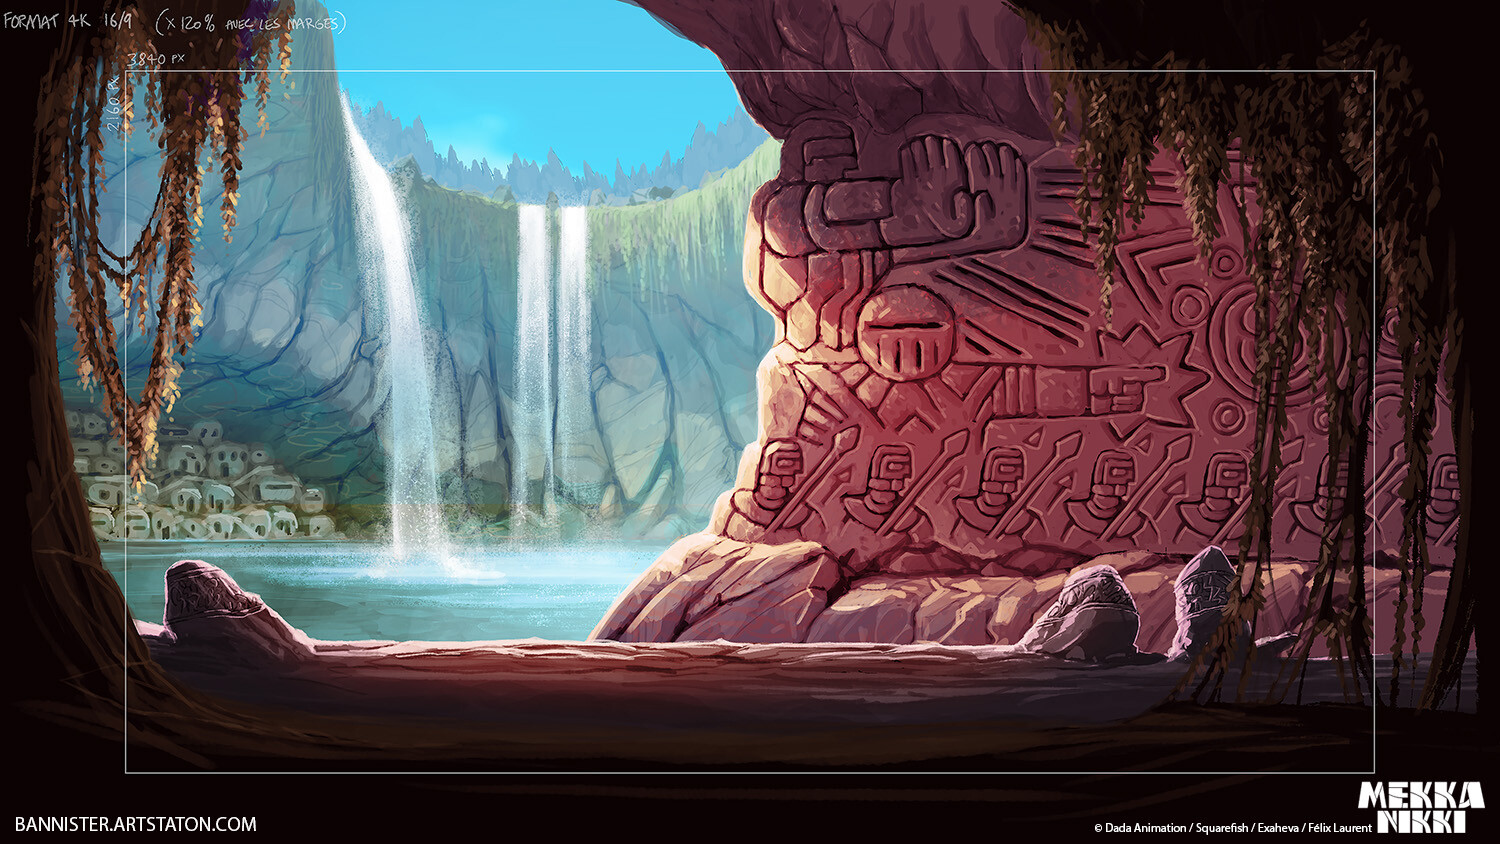 Cave wide shot.
Coming up with the depth feeling and the round shape of the place was challenging.
I painted the waterfalls, subtle water animation FX on them would do the trick.